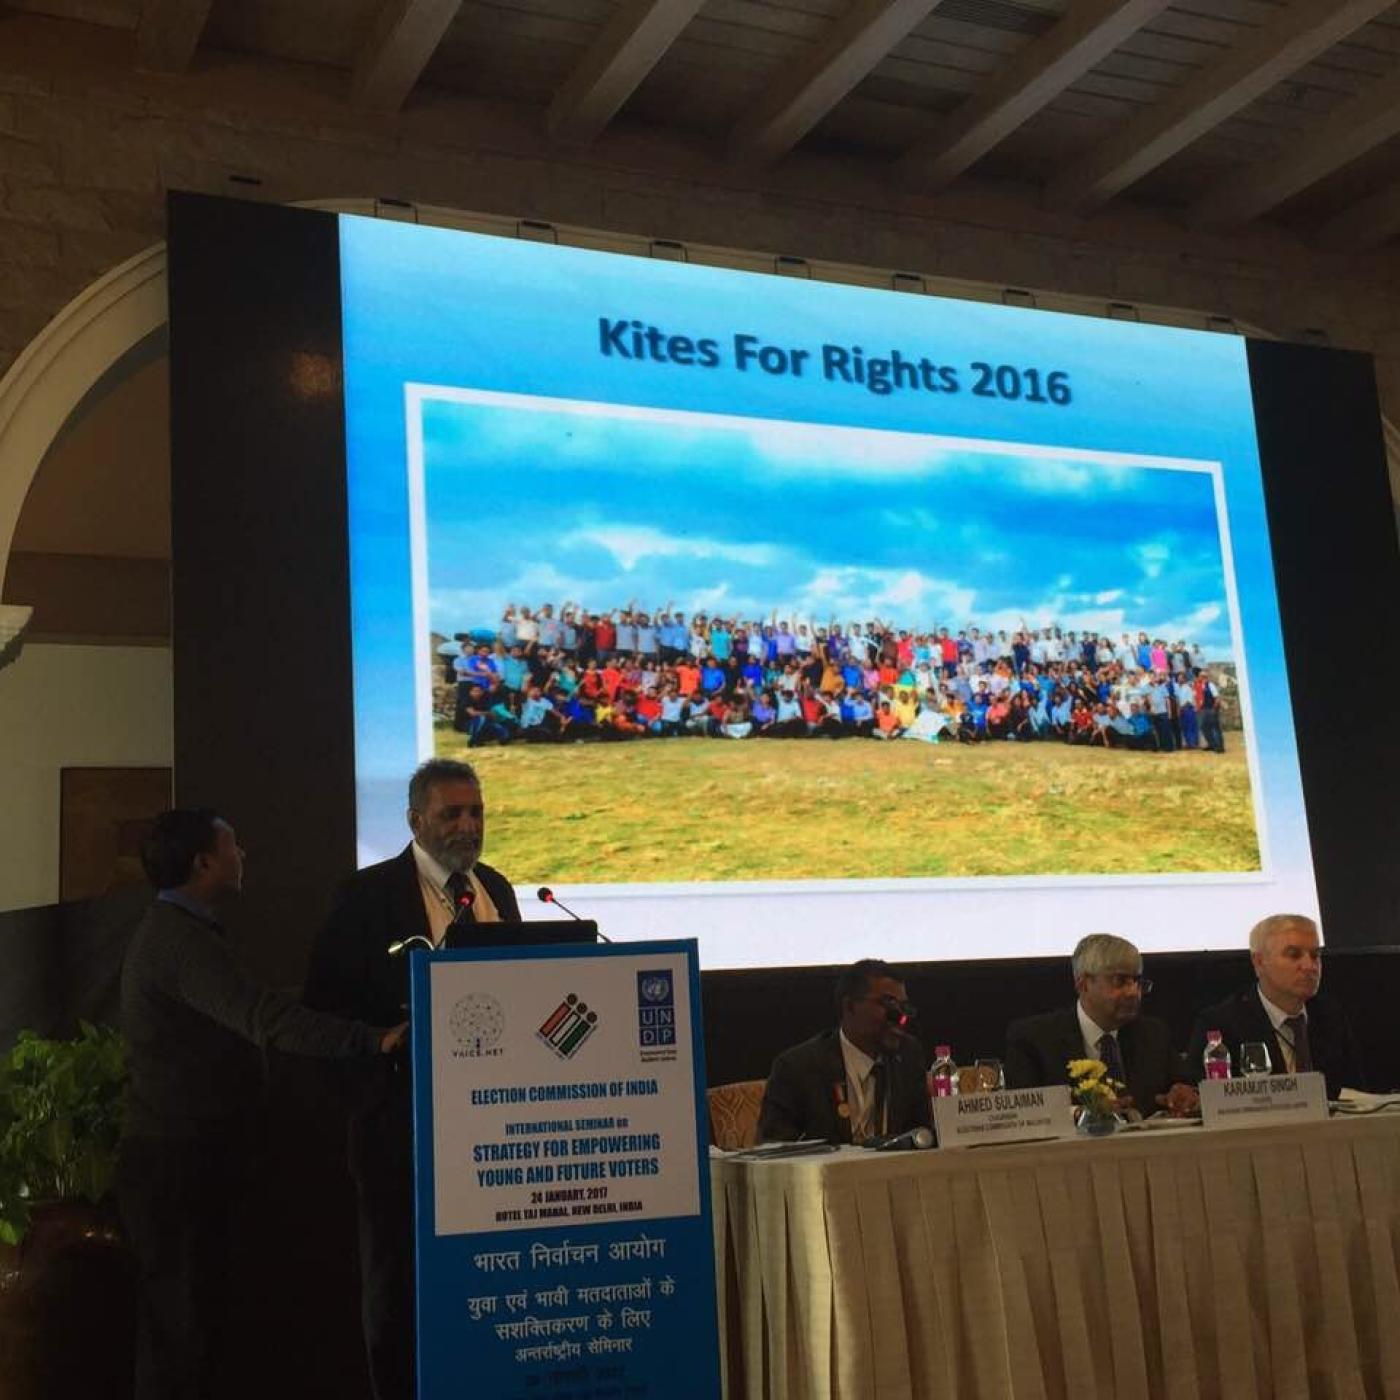 IFES CEO Presents Youth Engagement Strategies at Indian Election Commission Conference Embedded Image